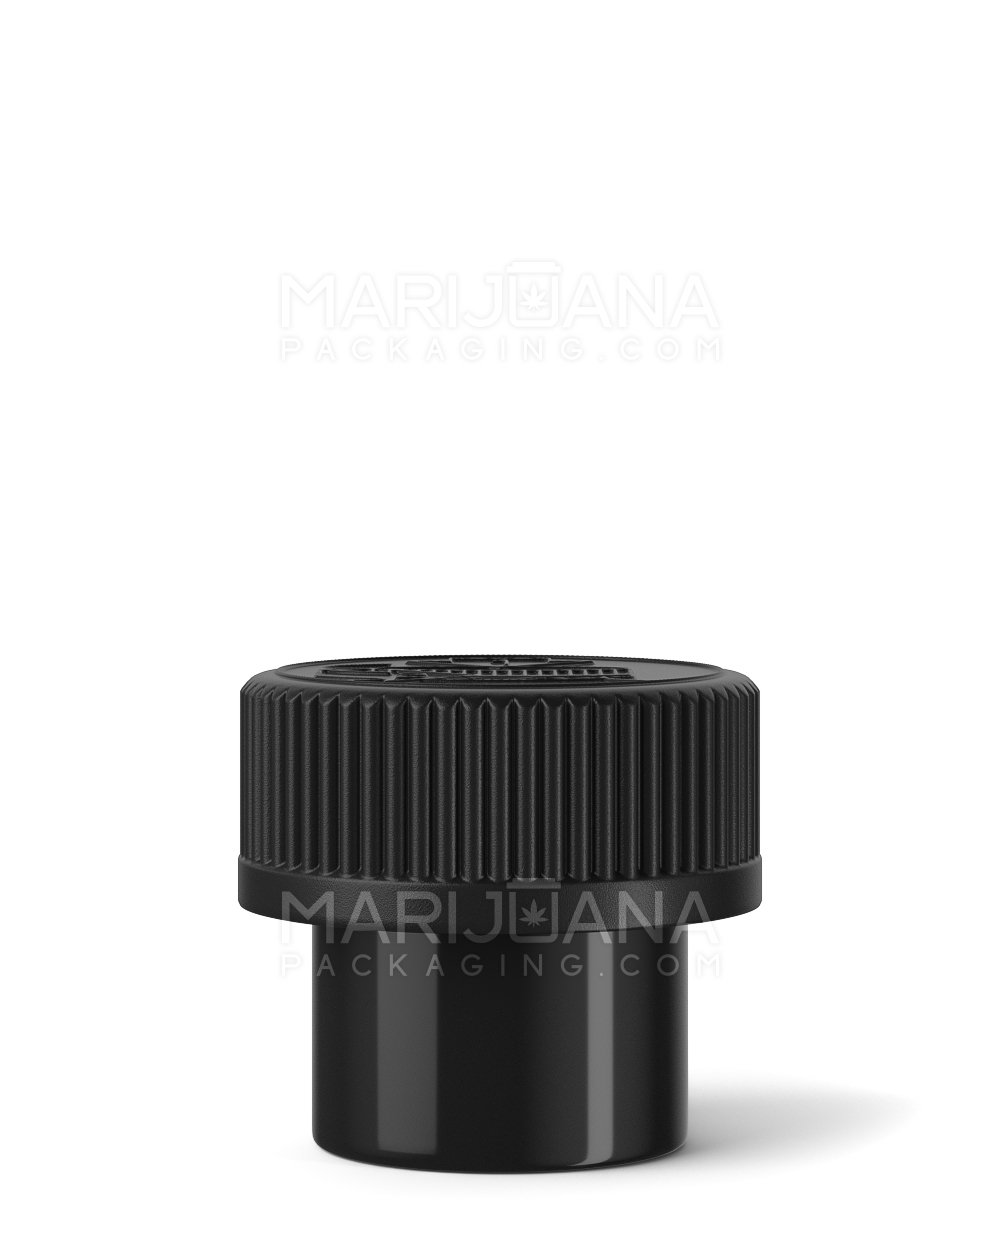 Child Resistant | Push Down & Turn Concentrate Container | 15mL - Black - 500 Count - 1